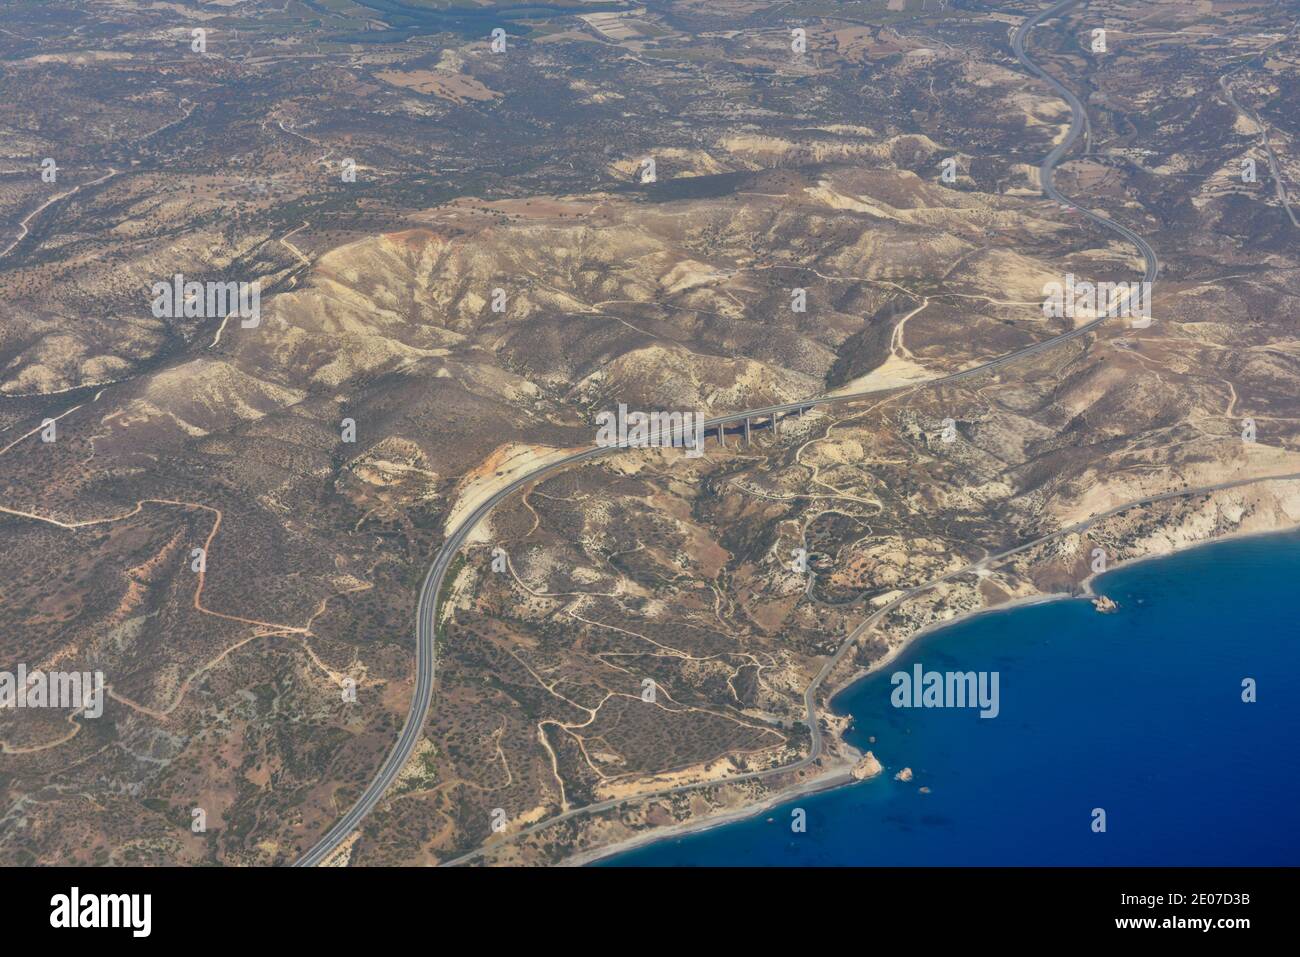 Aerial view over Cyprus Aphrodite hills, beach, rock, in Limassol district with A6 highway and coastal B6 road along Mediterranean sea Stock Photo